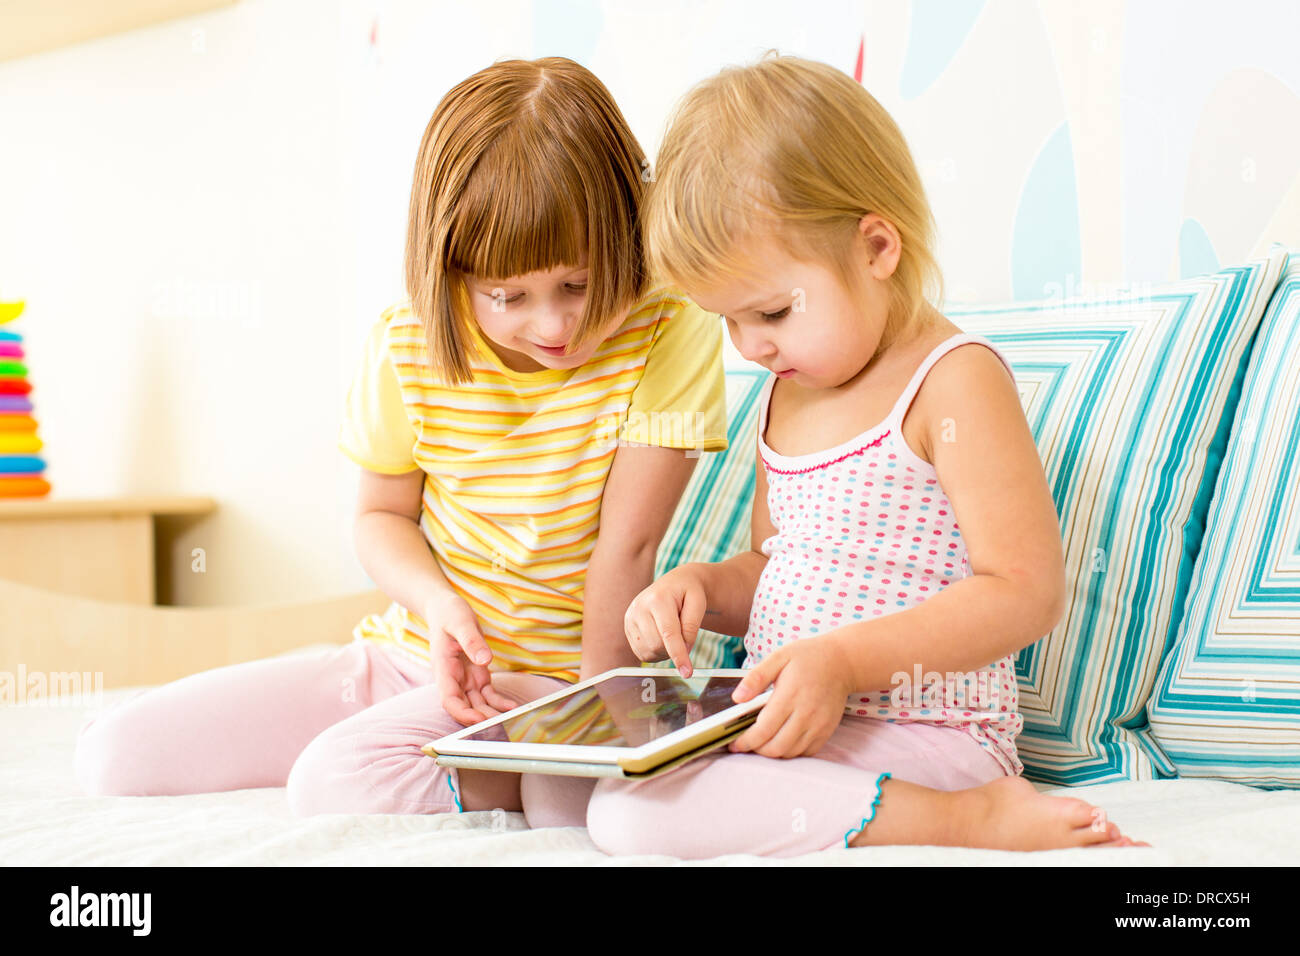 kids playing with digital tablet Stock Photo